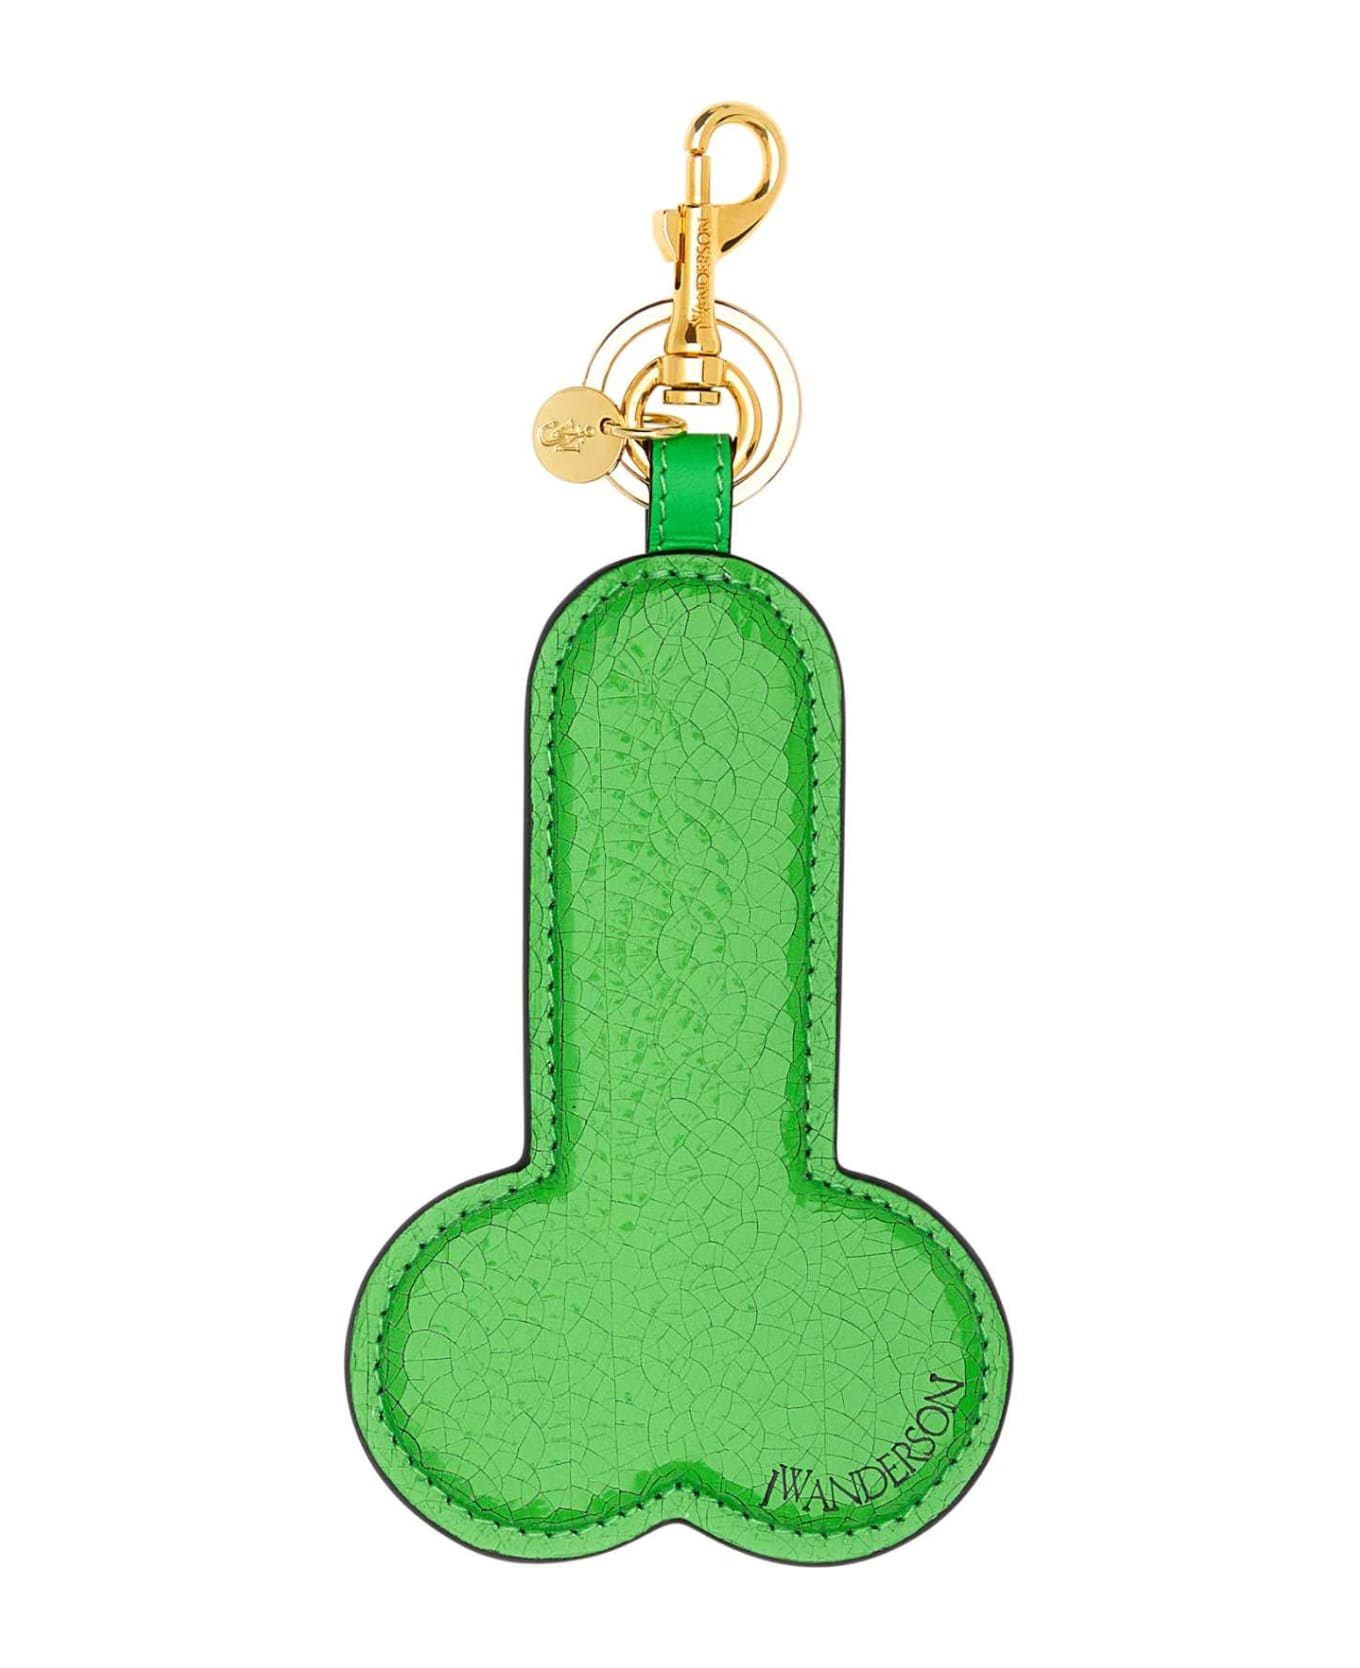 J.W. Anderson Fluo Green Leather Key Ring - NEONGREEN キーリング